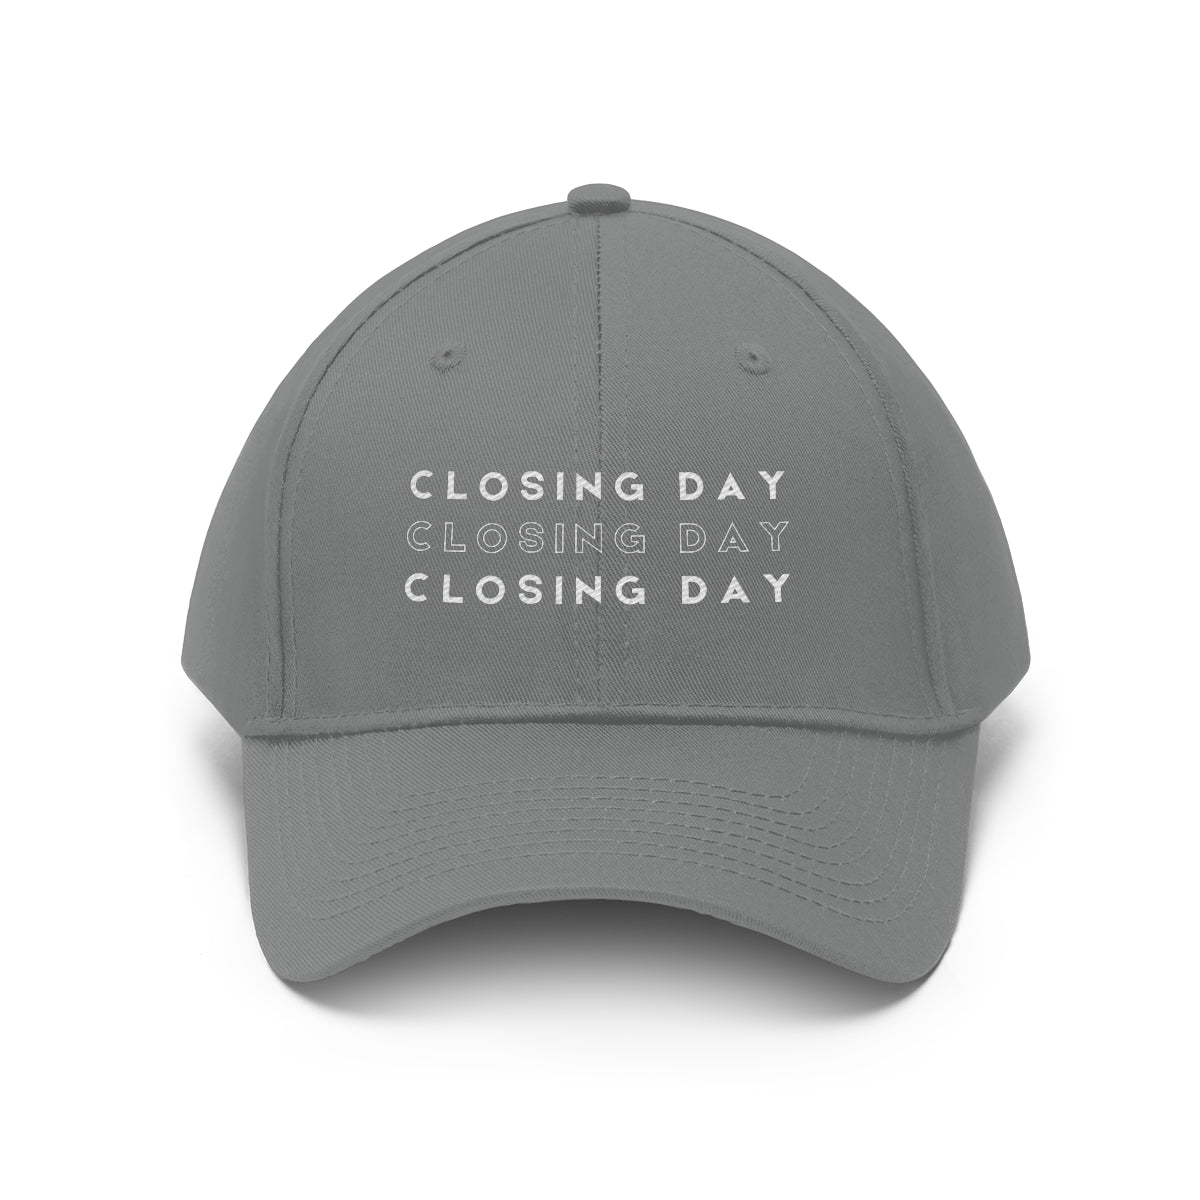 Hat - Closing Day